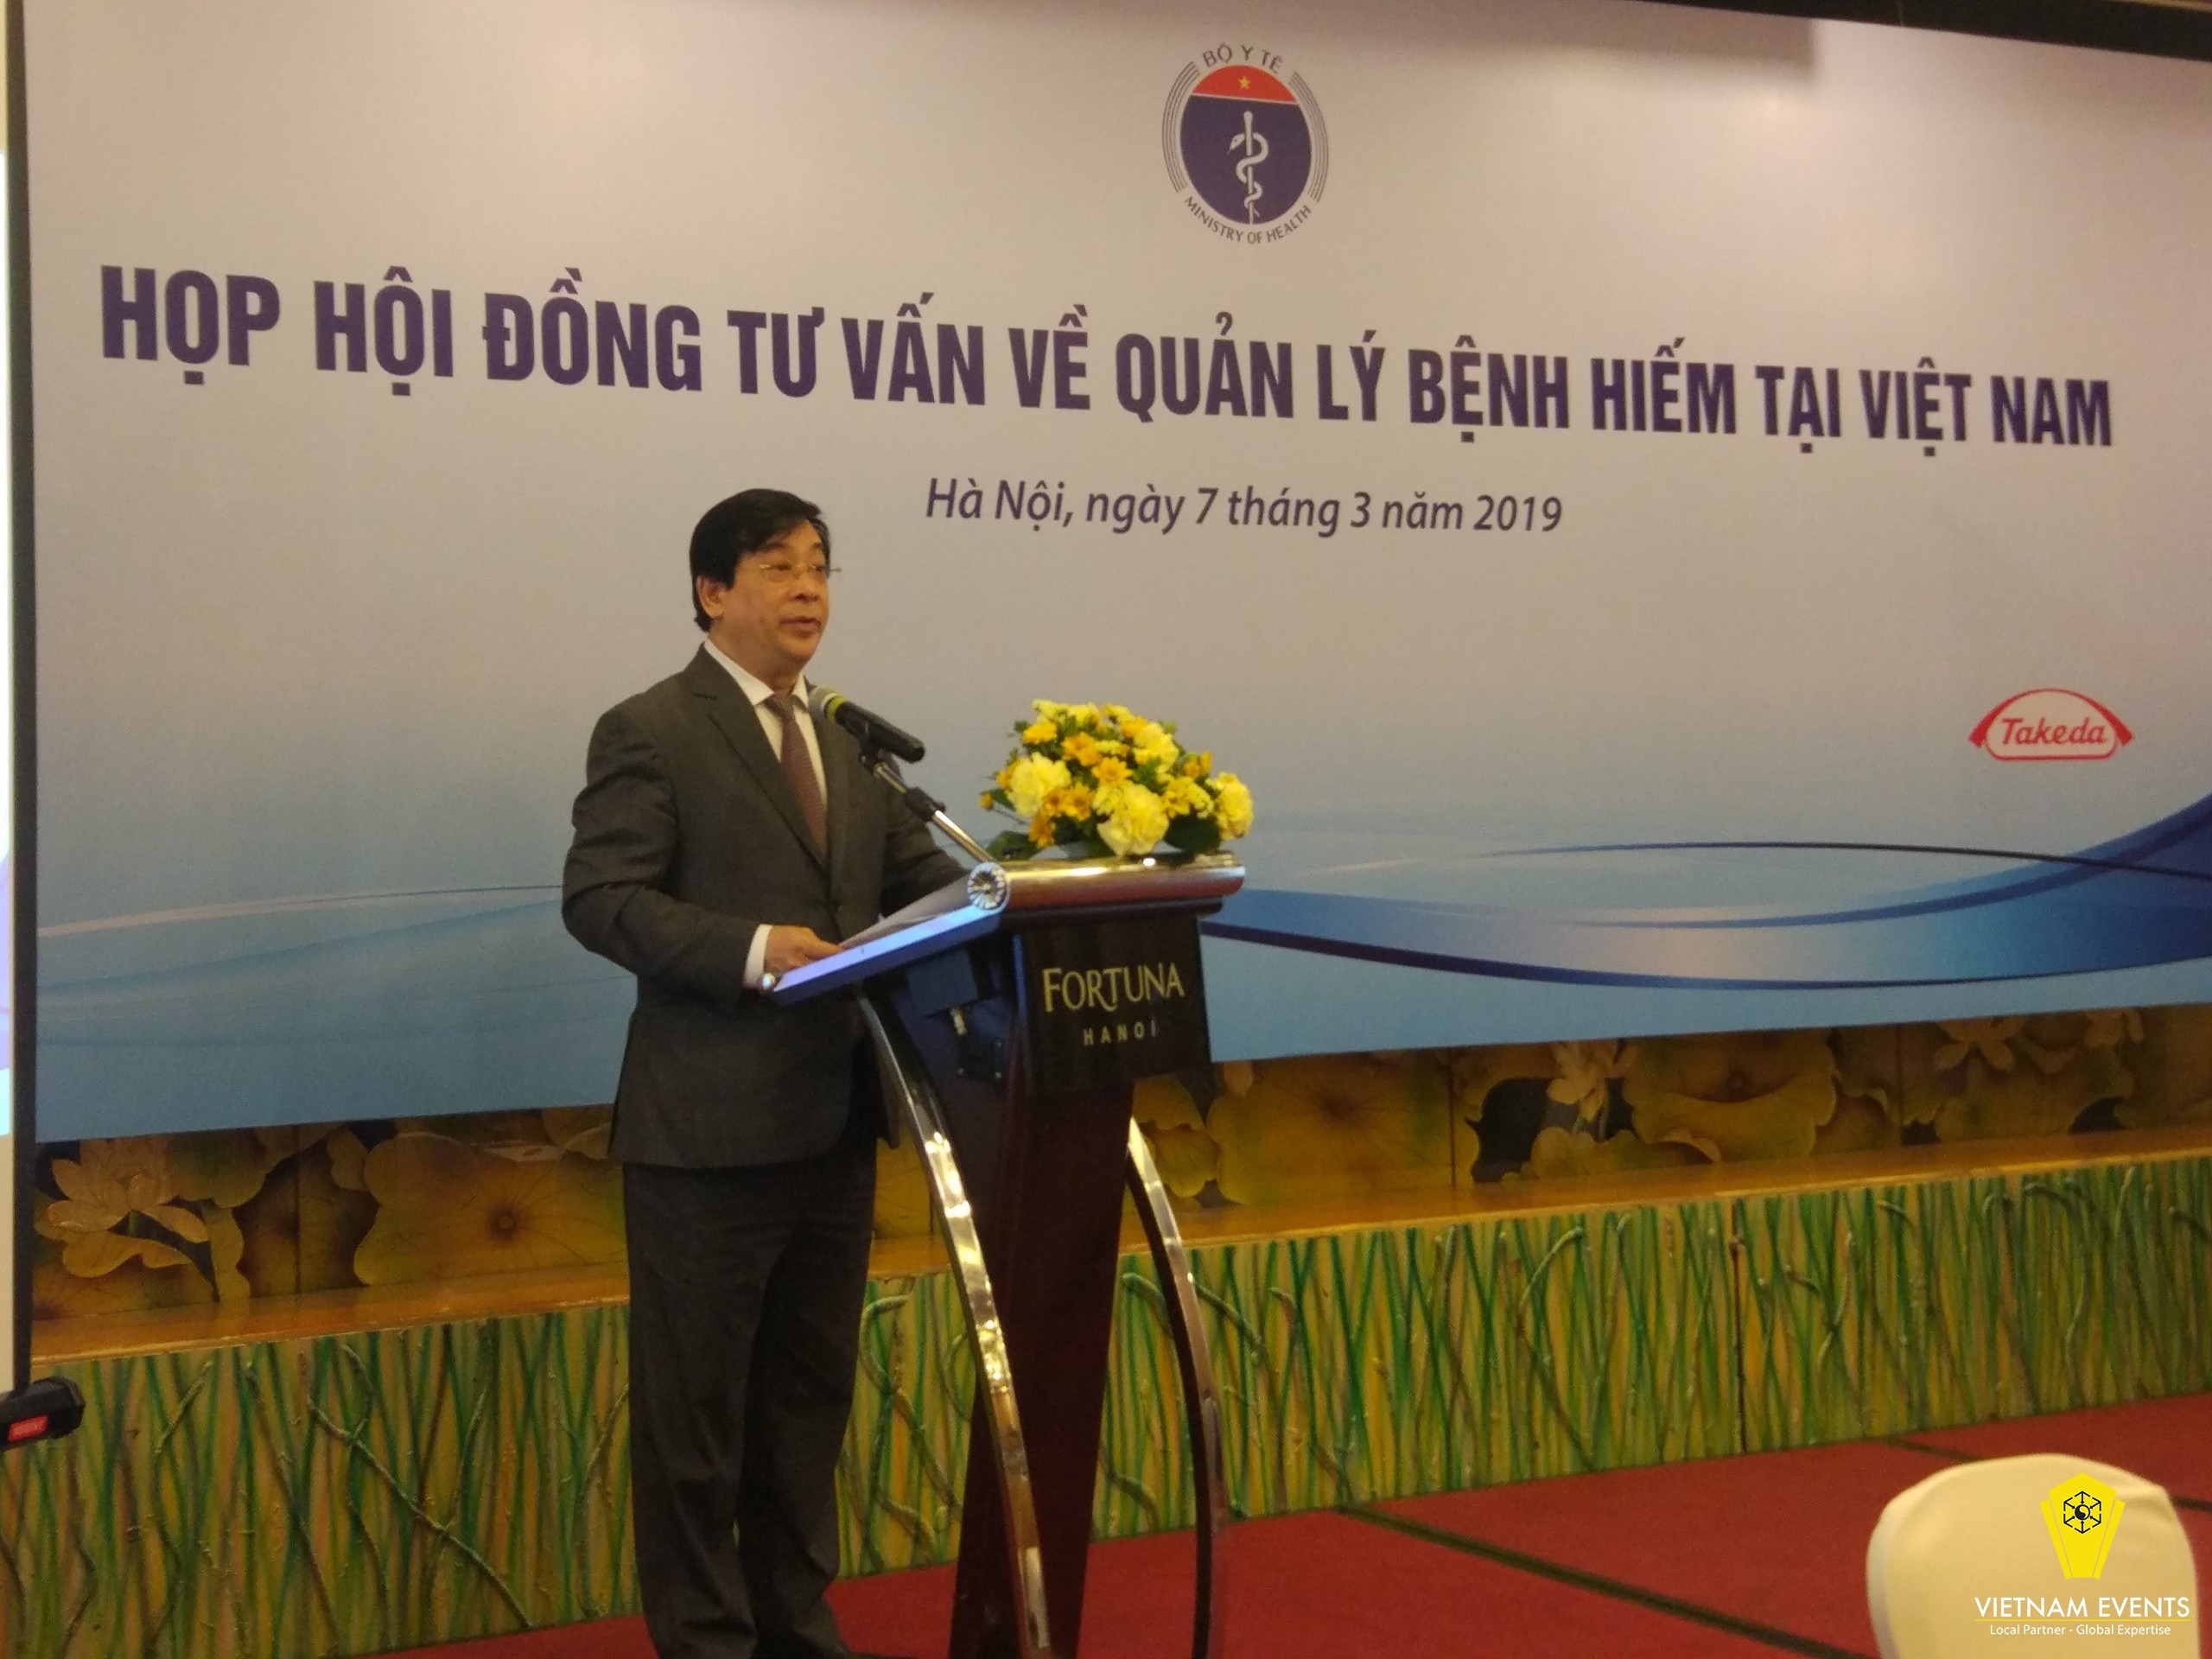 Consultants board on rare disease management meeting  in Vietnam